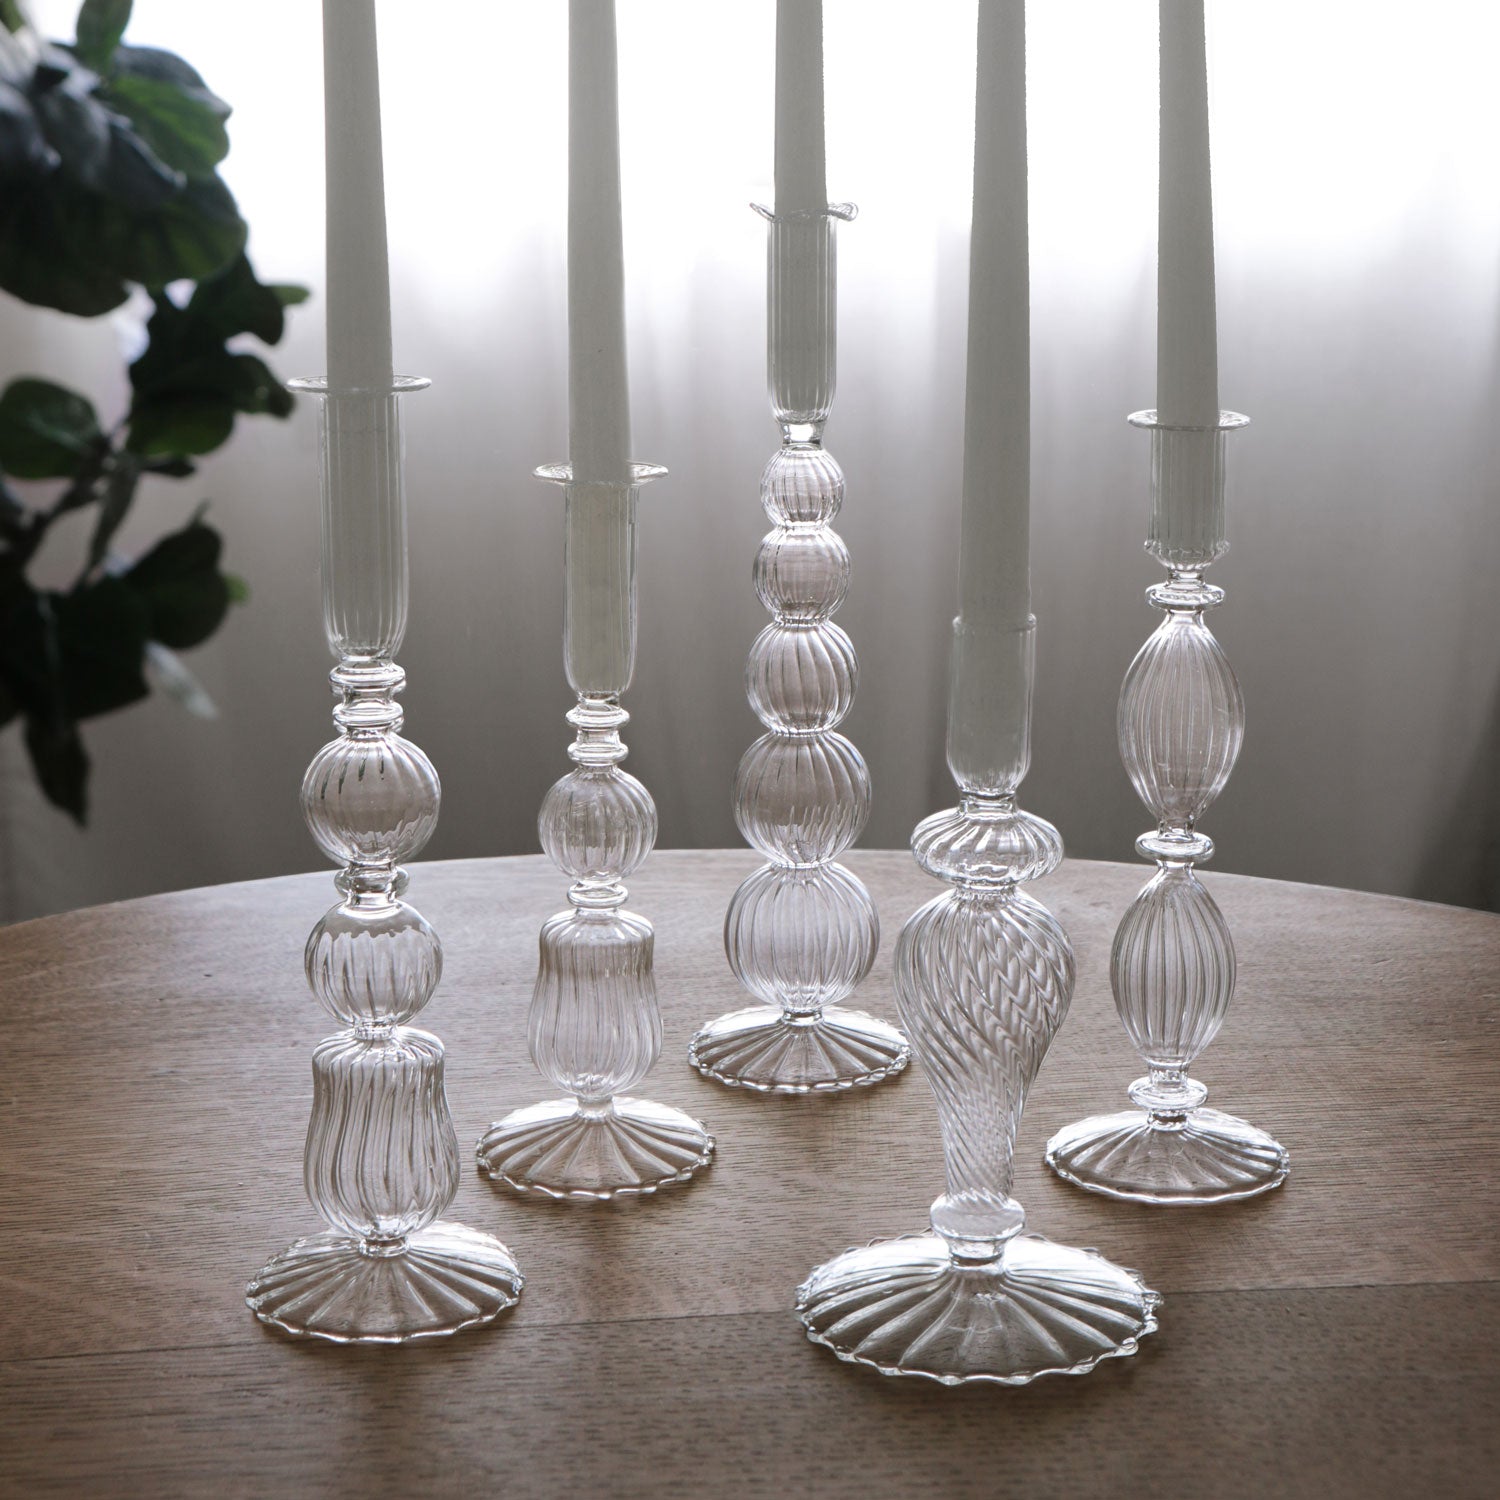 GLASS Cambridge Olivia 12&quot; Candlestick Holder Set of 2 (Clear)